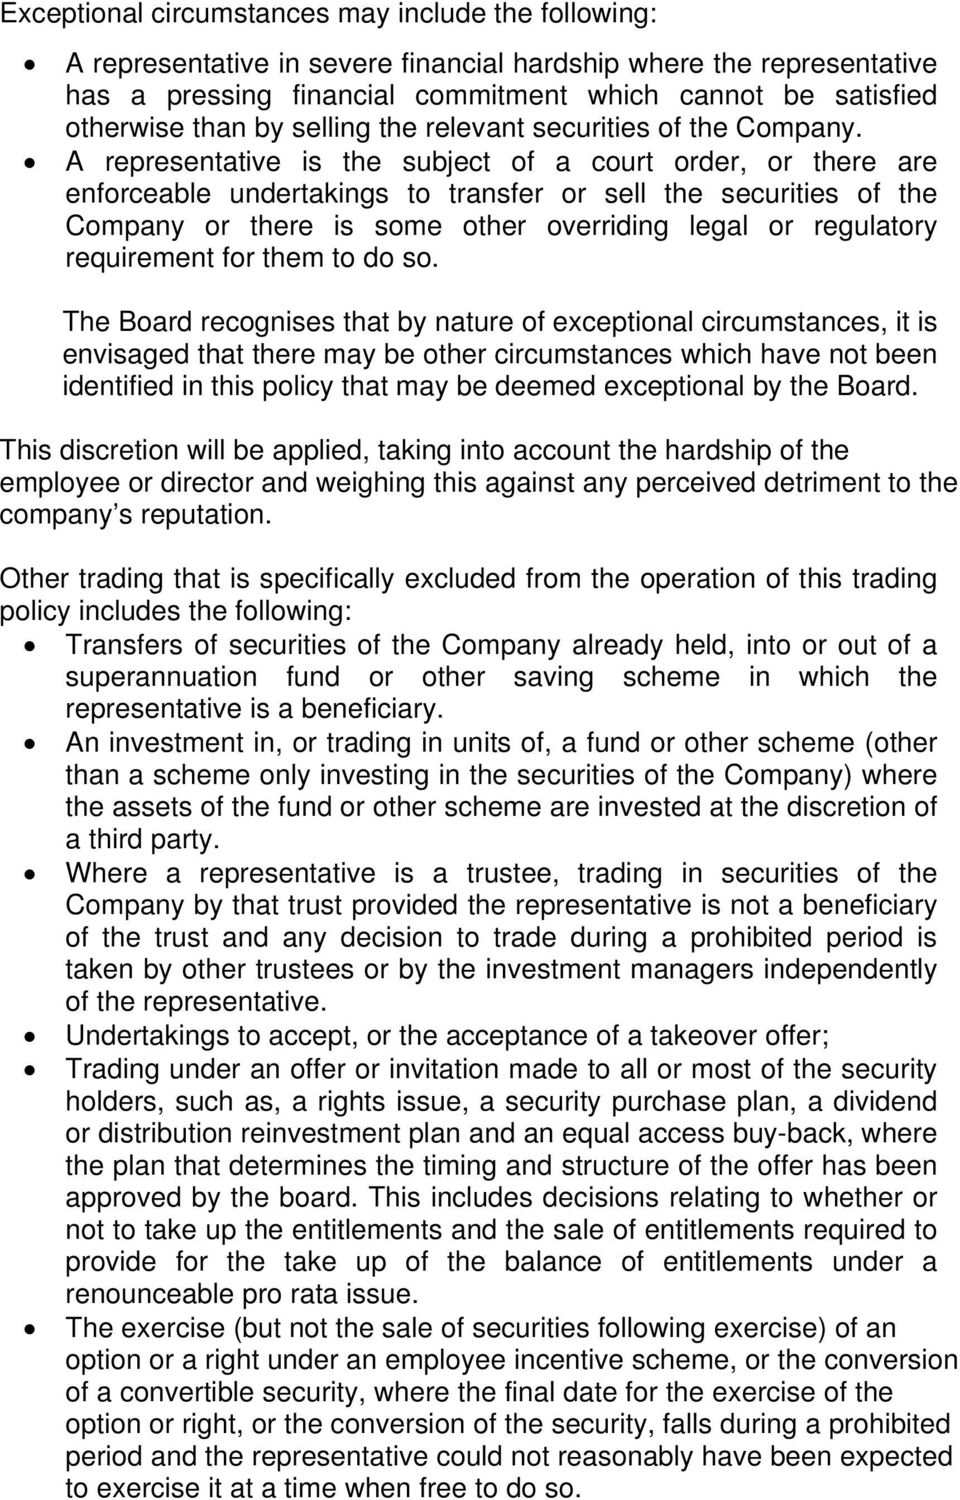 A representative is the subject of a court order, or there are enforceable undertakings to transfer or sell the securities of the Company or there is some other overriding legal or regulatory